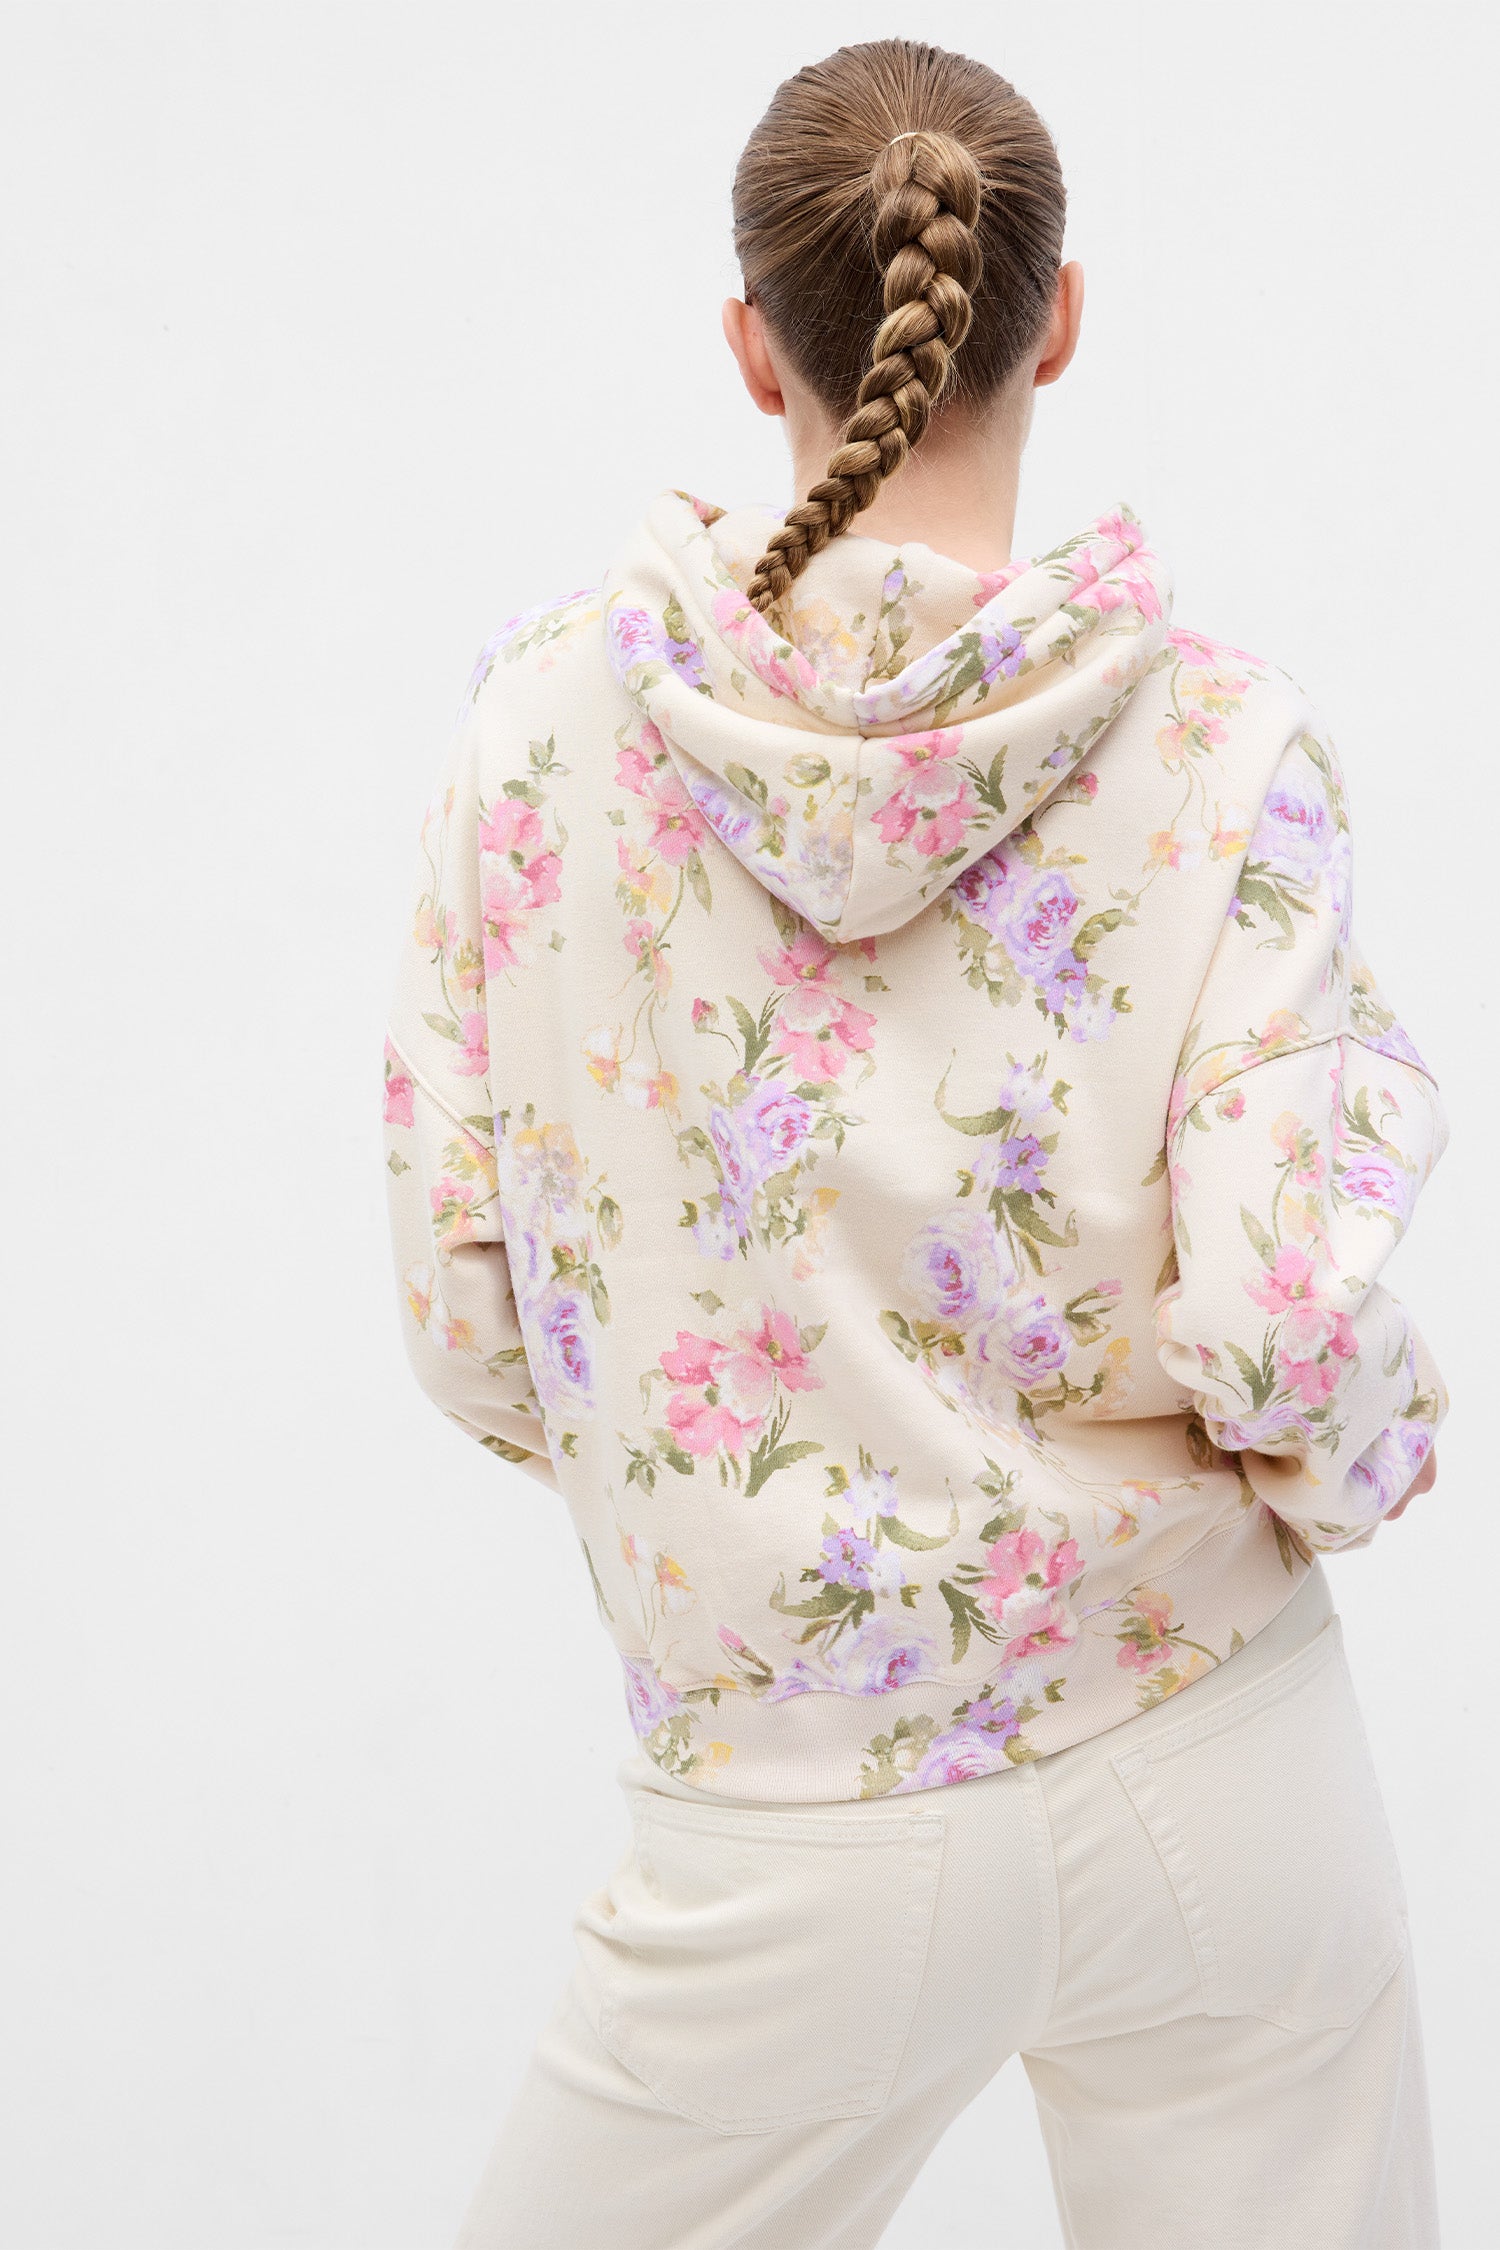 Back image of model wearing cream floral hoodie with GAP arch logo on chest and pink, purple, and green floral print